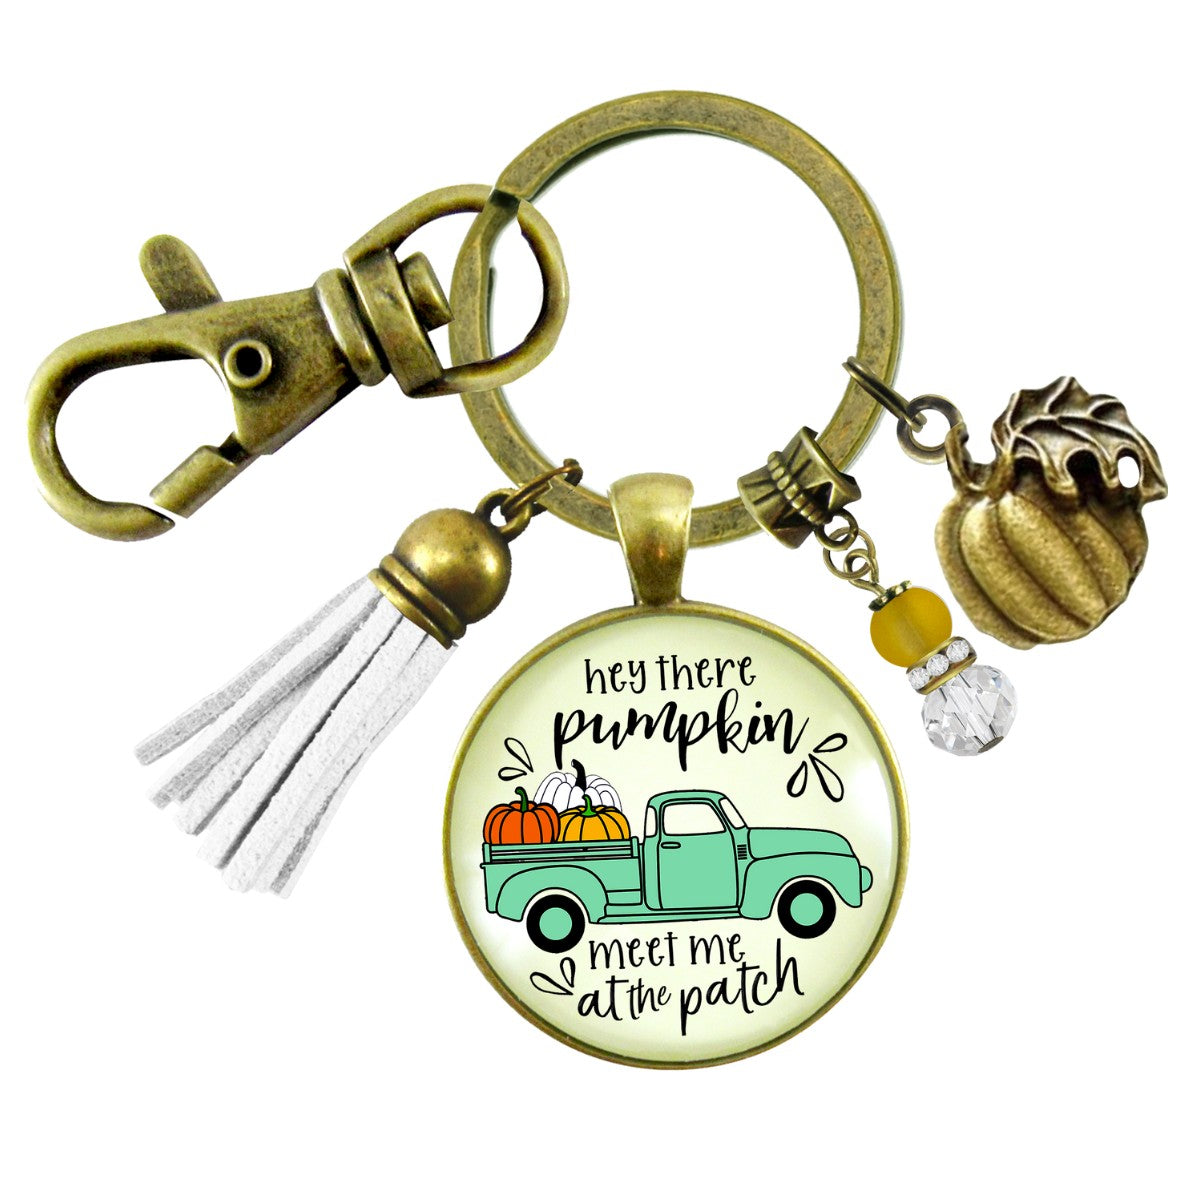 Hey There Pumpkin Keychain Meet Me At The Patch Autumn Theme Jewelry October Truck Pendant For Women  Keychain - Women - Gutsy Goodness Handmade Jewelry